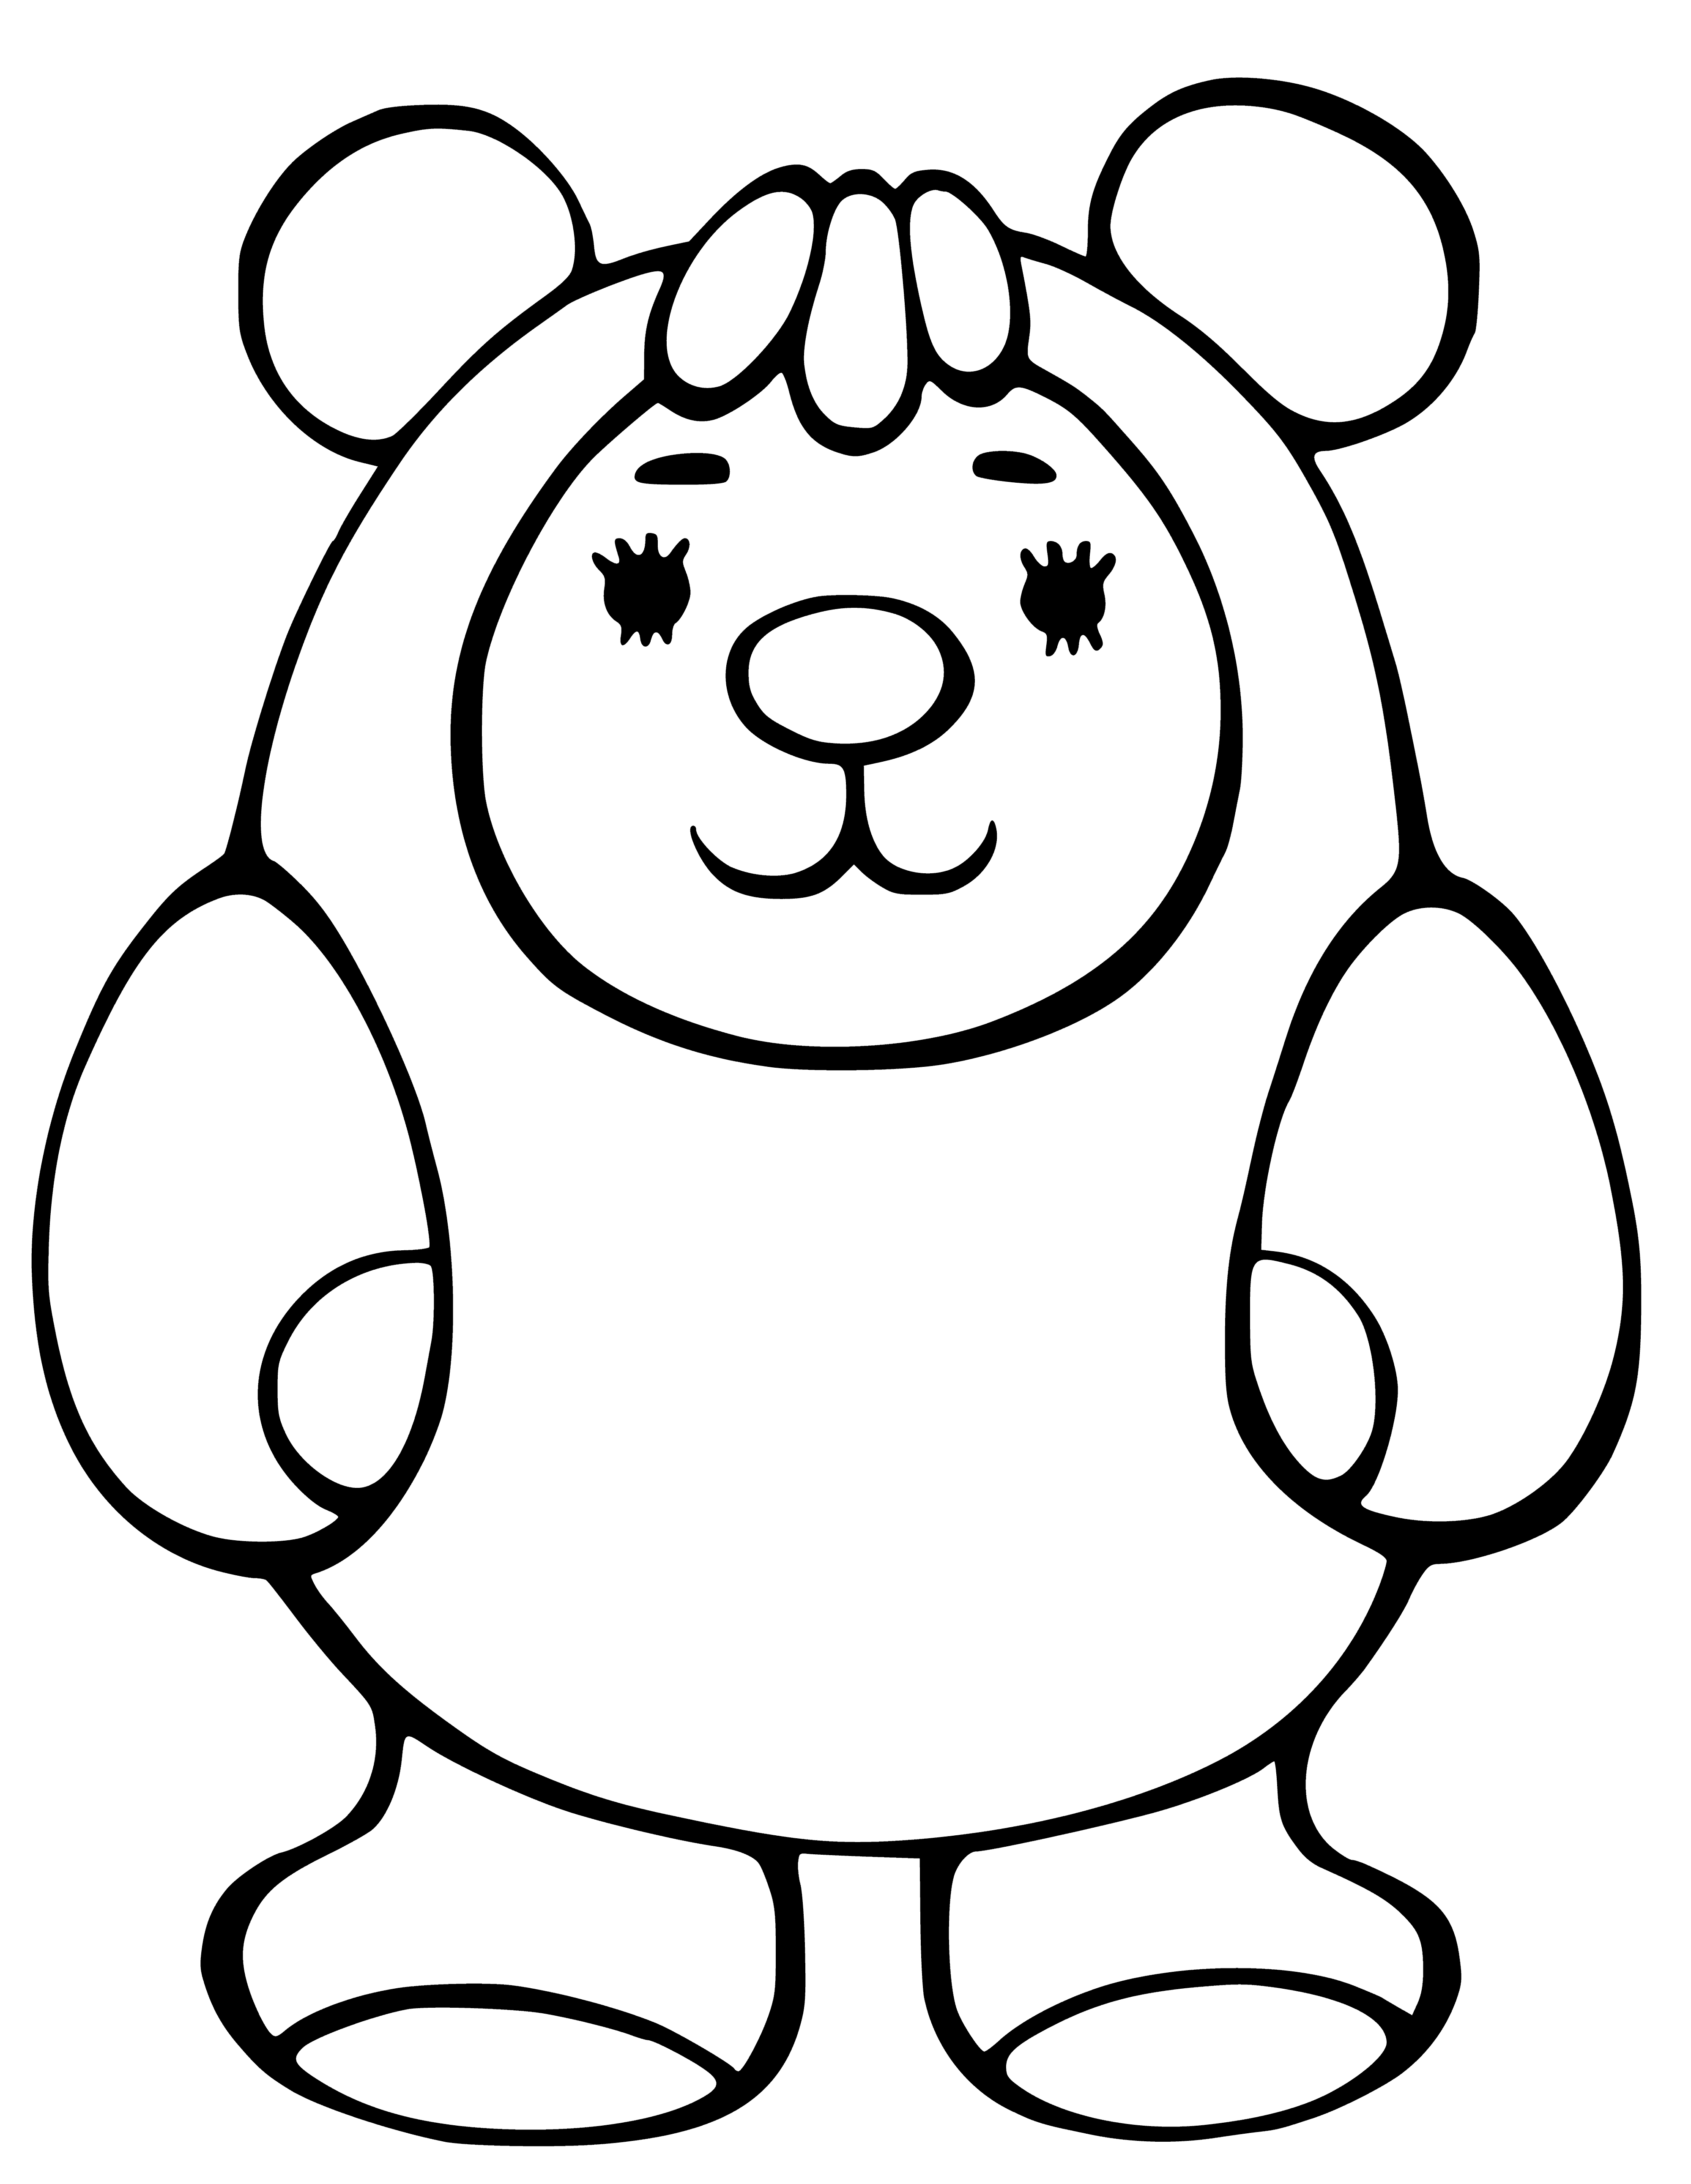 coloring page: Large mammal w/ 4 furry legs, black fur, long snout, standing on hind legs, open mouth, tongue out & sharp claws.